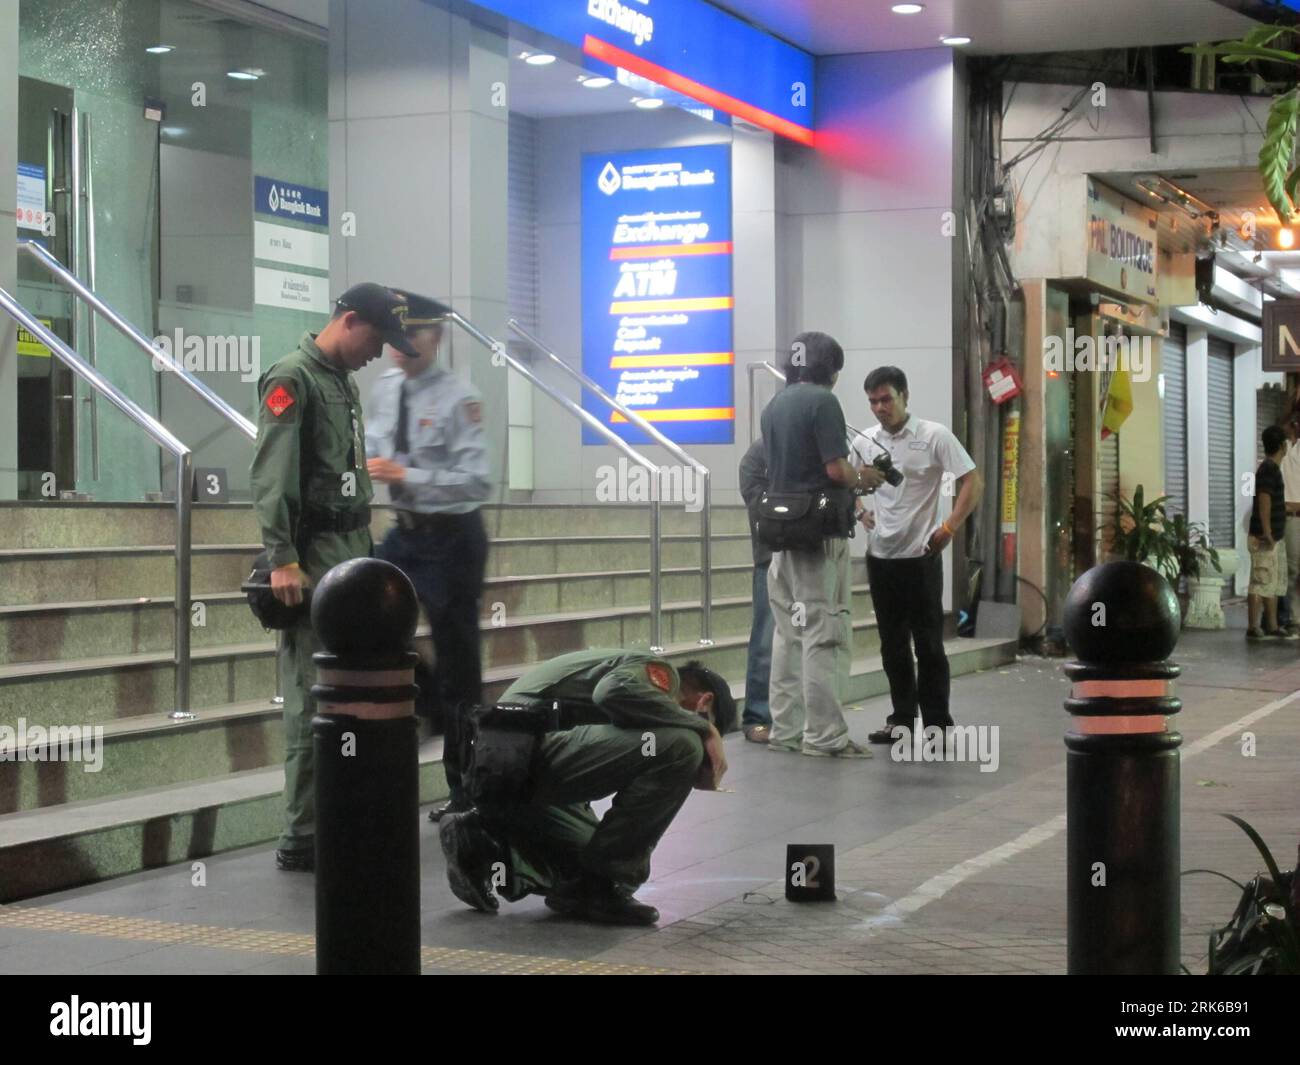 Bildnummer: 53822429  Datum: 27.02.2010  Copyright: imago/Xinhua (100227) -- BANGKOK, Feb. 27, 2010 (Xinhua) -- Police investigate an explosion case in front of a Bangkok Bank branch in central Bangkok, capital of Thailand, Feb. 27, 2010. A man on a motorcycle passed by and threw a hand grenade toward the branch bank at Silom road, Bangrak district, at about 9:30 p.m. on Saturday, but only hit the tree in front of the bank and exploded, leaving one person slightly injured. (Xinhua/Zhu Li) (gxr) (1)THAILAND-BANGKOK-EXPLOSION PUBLICATIONxNOTxINxCHN Explosion Thailand kbdig xsp 2010 quer o0 Bombe Stock Photo